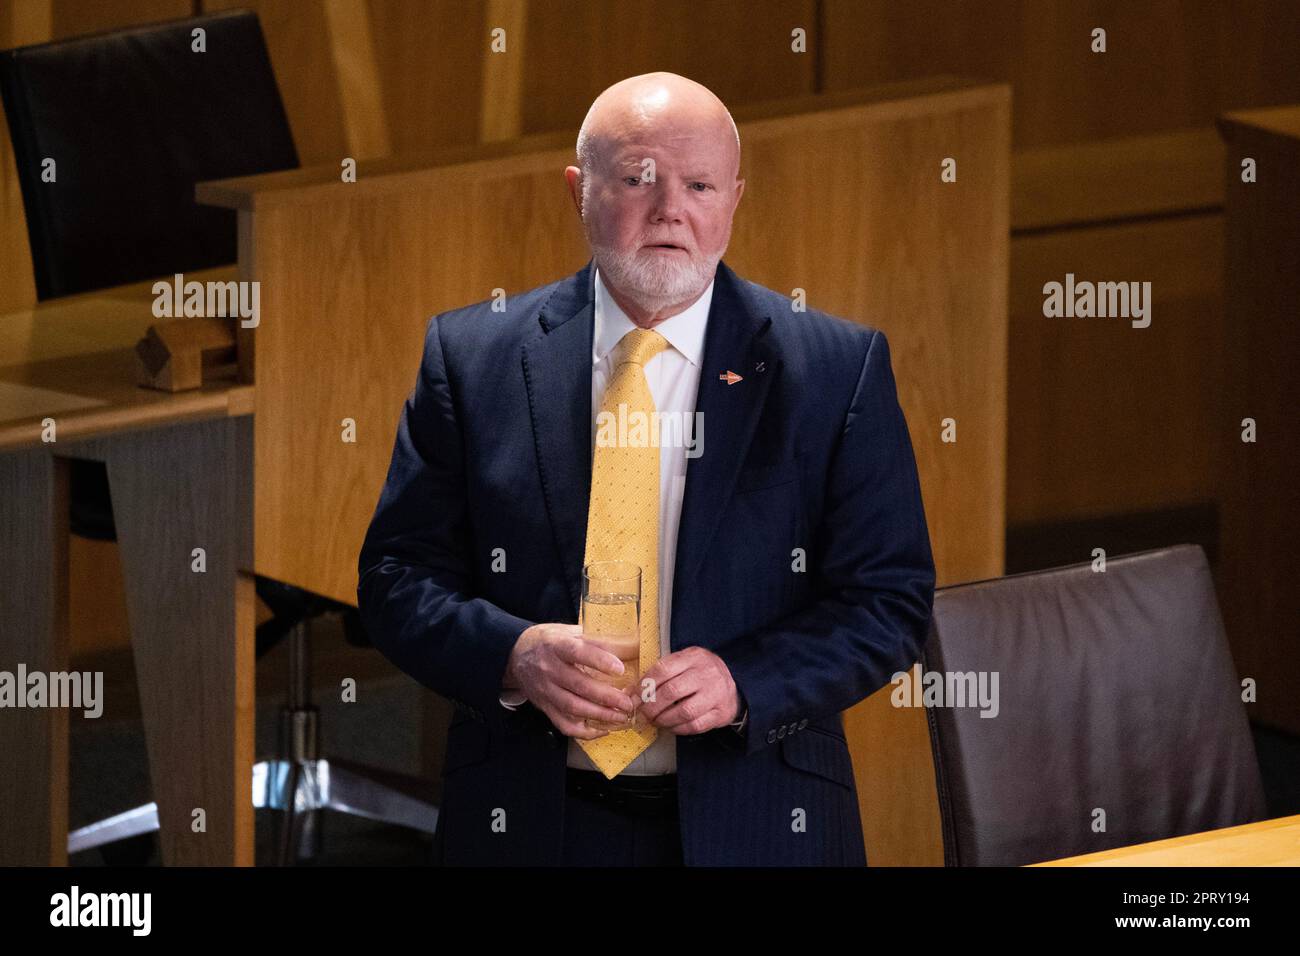 Edinburgh, Scotland, UK. 27th Apr, 2023. PICTURED: Colin Beattie MSP, Treasurer of the Scottish National Party (SNP). Weekly session of First Ministers Questions as Humza Yousaf MSP, First Minister of Scotland takes questions in the chamber. Scenes also inside the corridor before and after FMQs. Credit: Colin Fisher/Alamy Live News Stock Photo